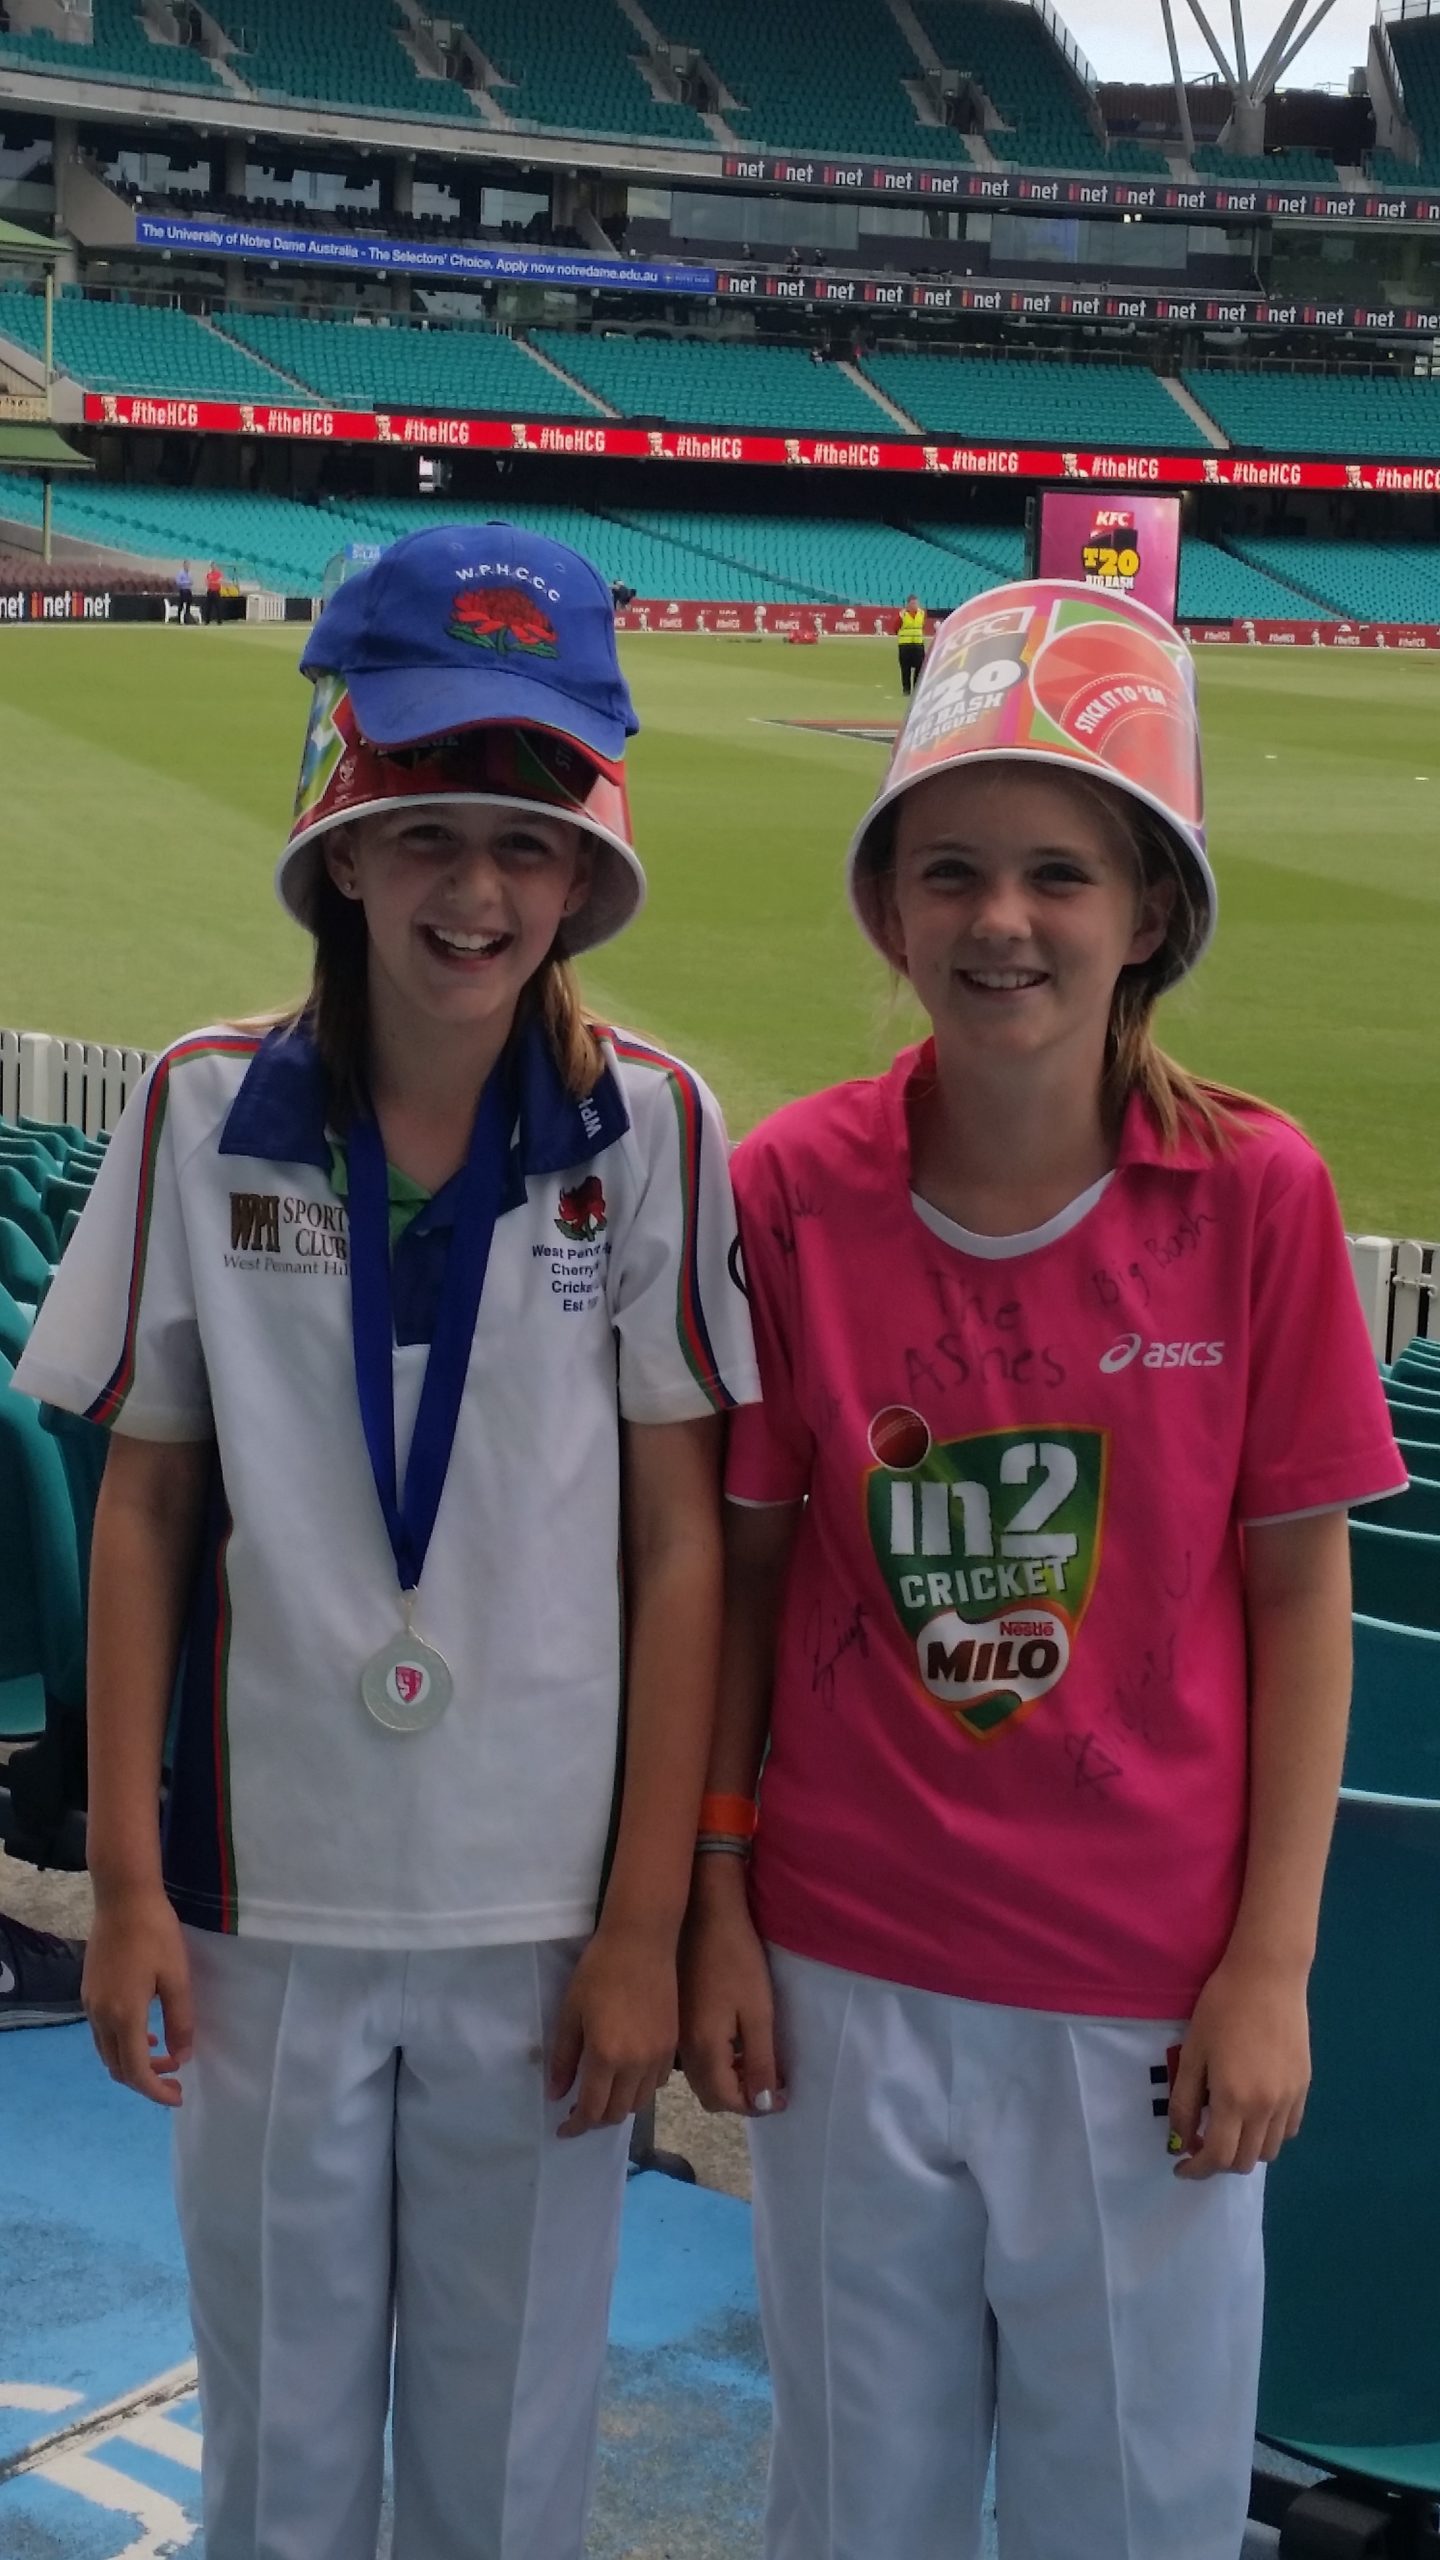 Danielle Chivers(Girls U12 White) & Ellen Hall at the SCG before the Sixers Big Bash 19 December 2014. The girls were at the SCG to be presented with their Premiership medallions for winning the inaugural U15 Division 1 Junior Breakers Junior Cricket League run.